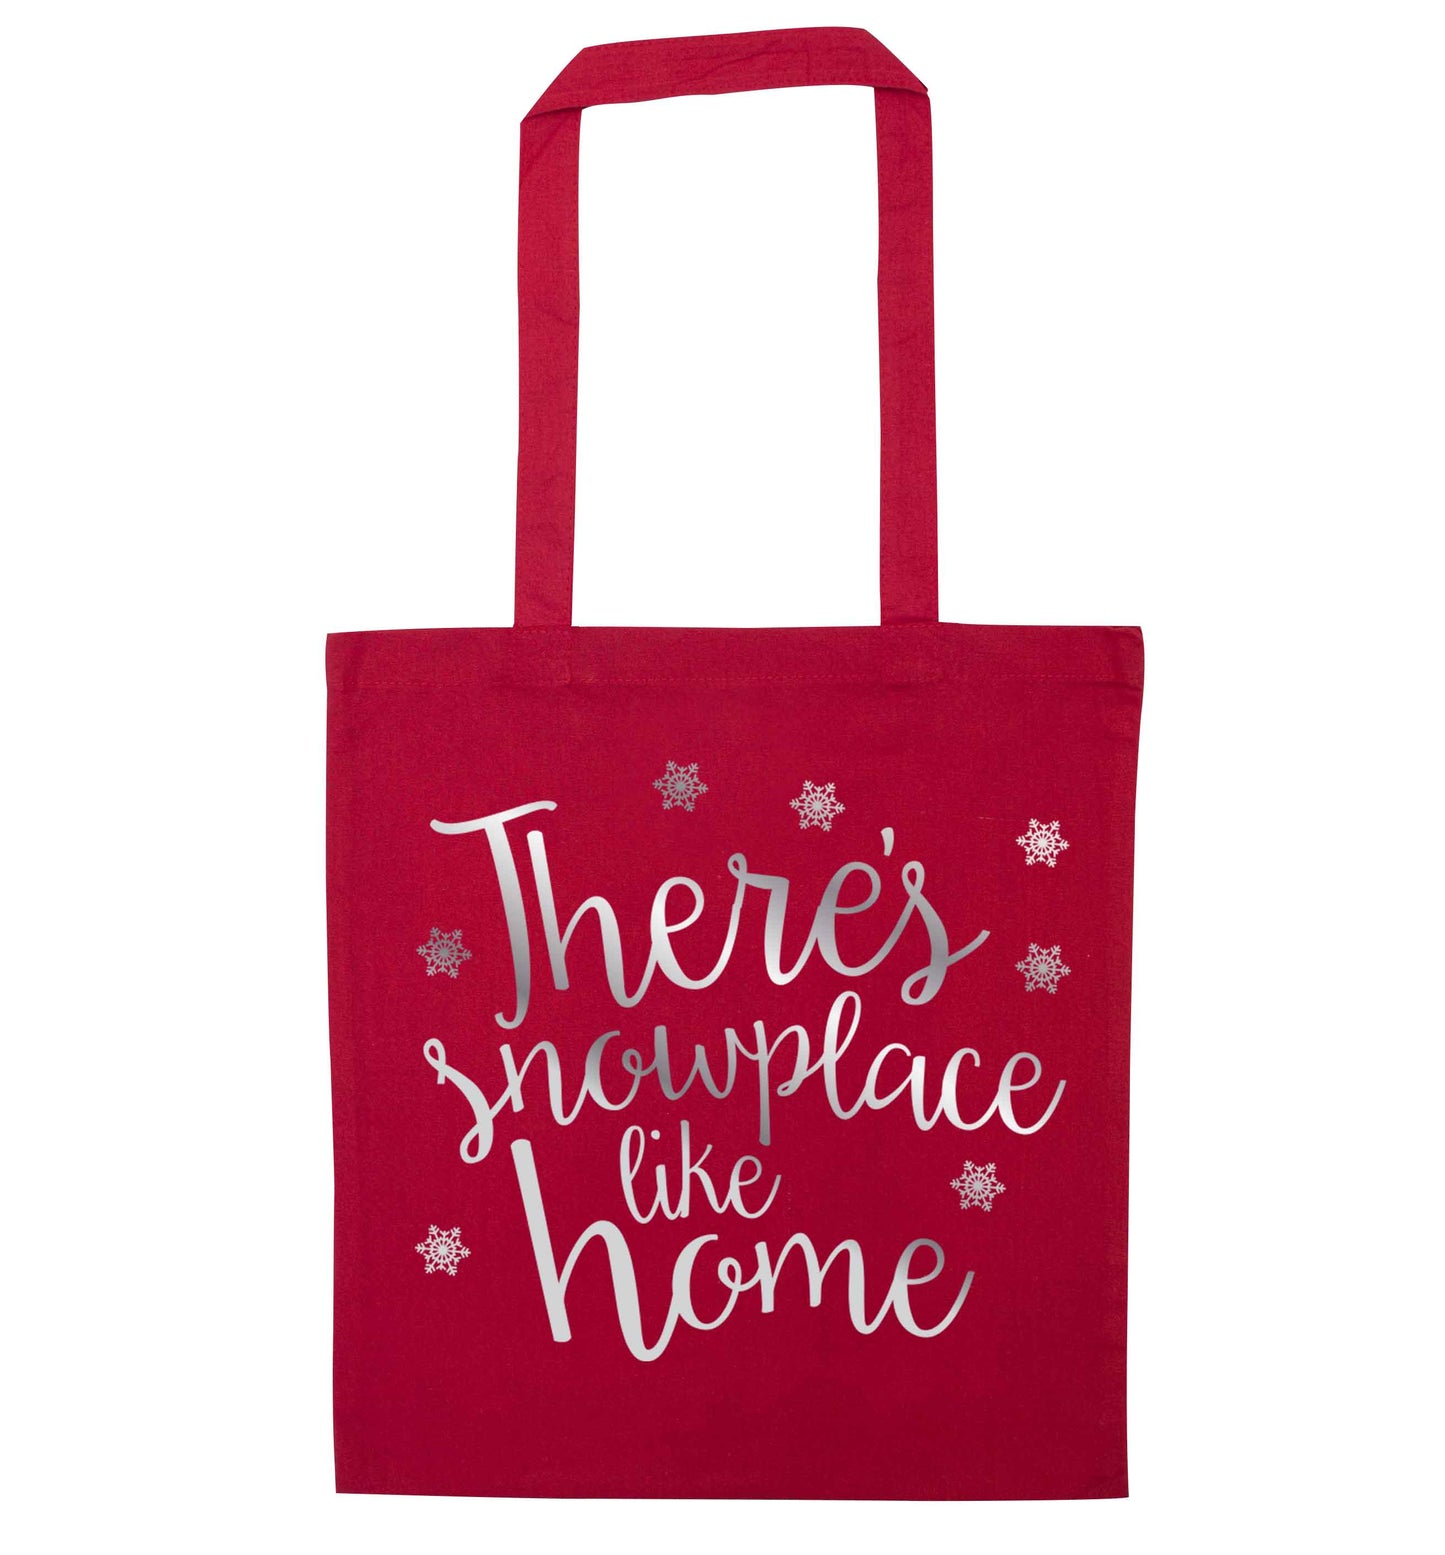 There's snowplace like home - metallic silver red tote bag